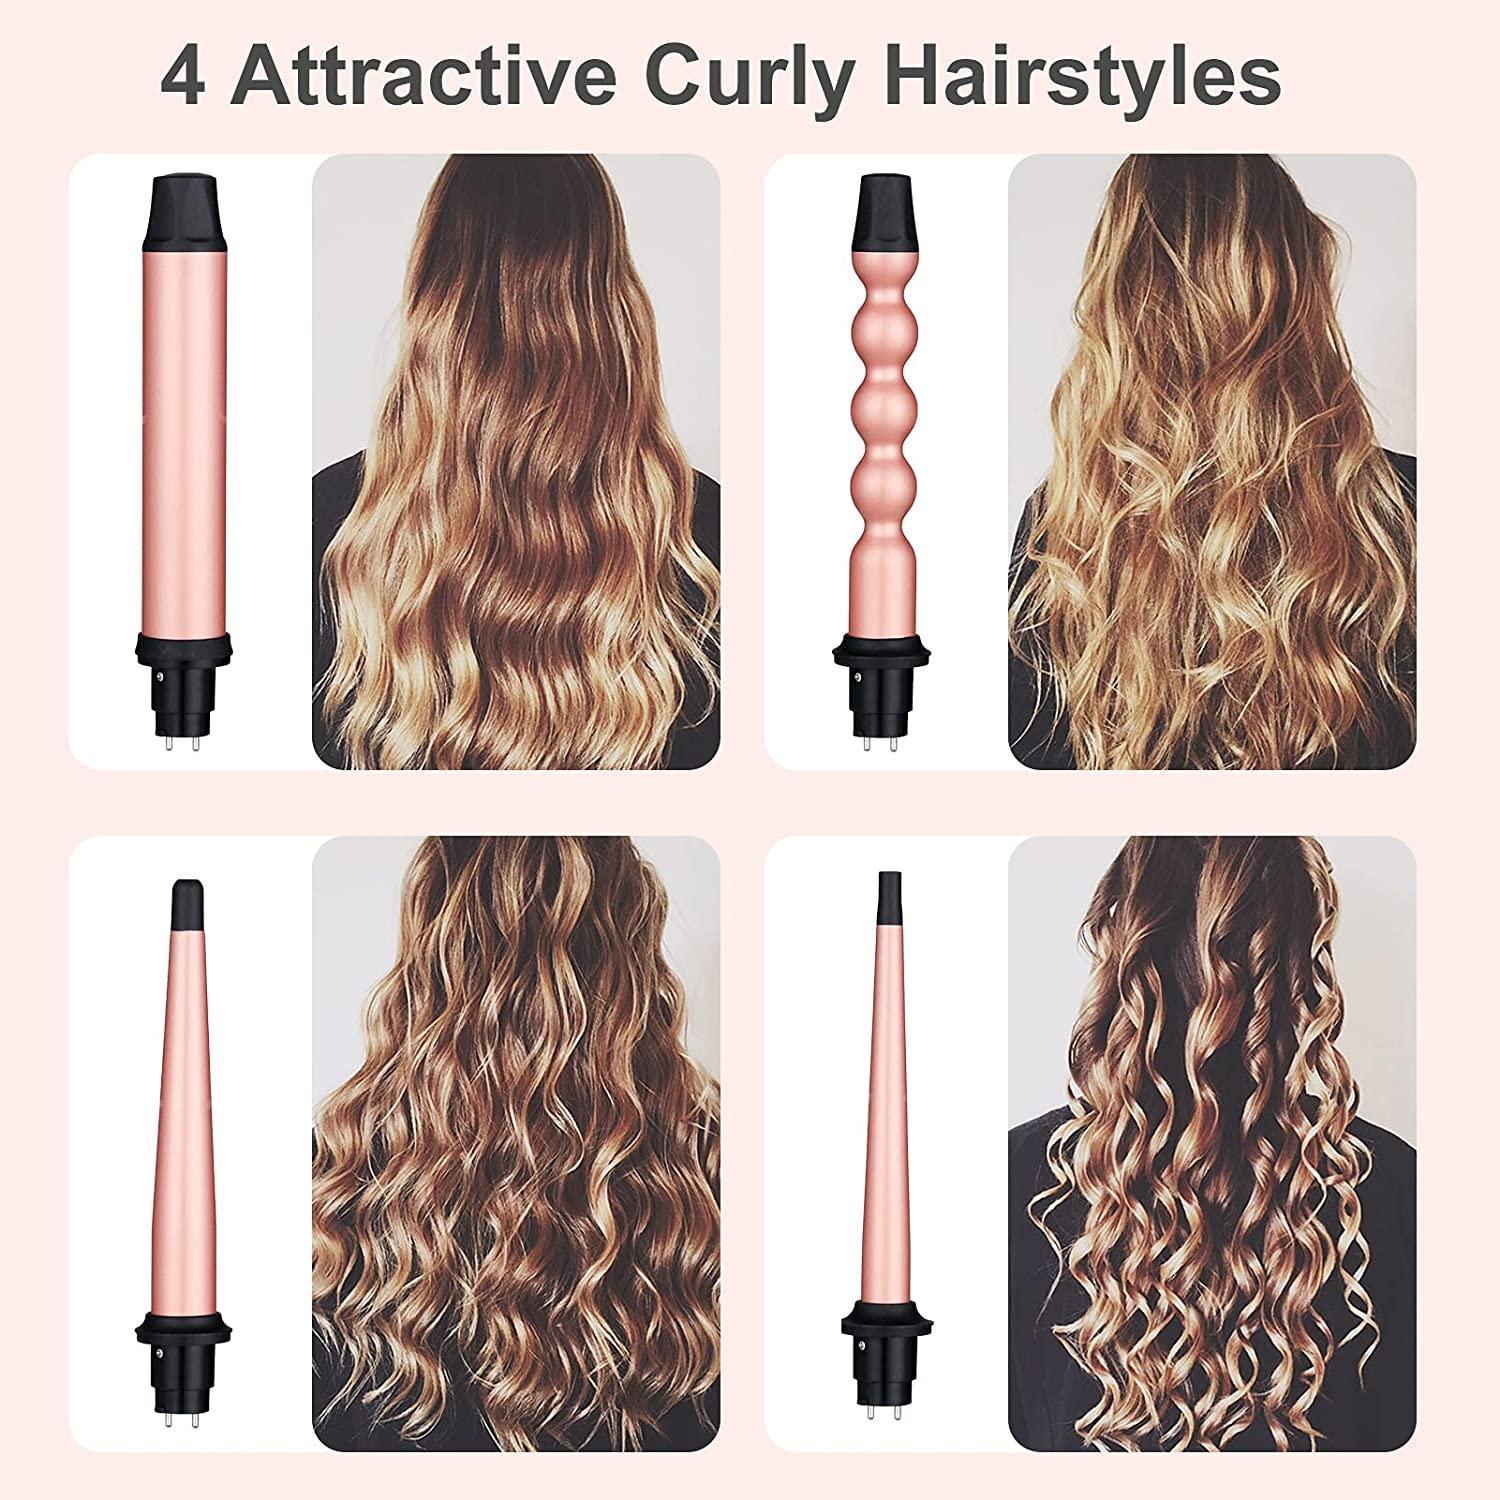 Hairstylists Agree: These Are the Best Curling Irons for Curly Hair | Good curling  irons, Ebony hair, Curly hair styles